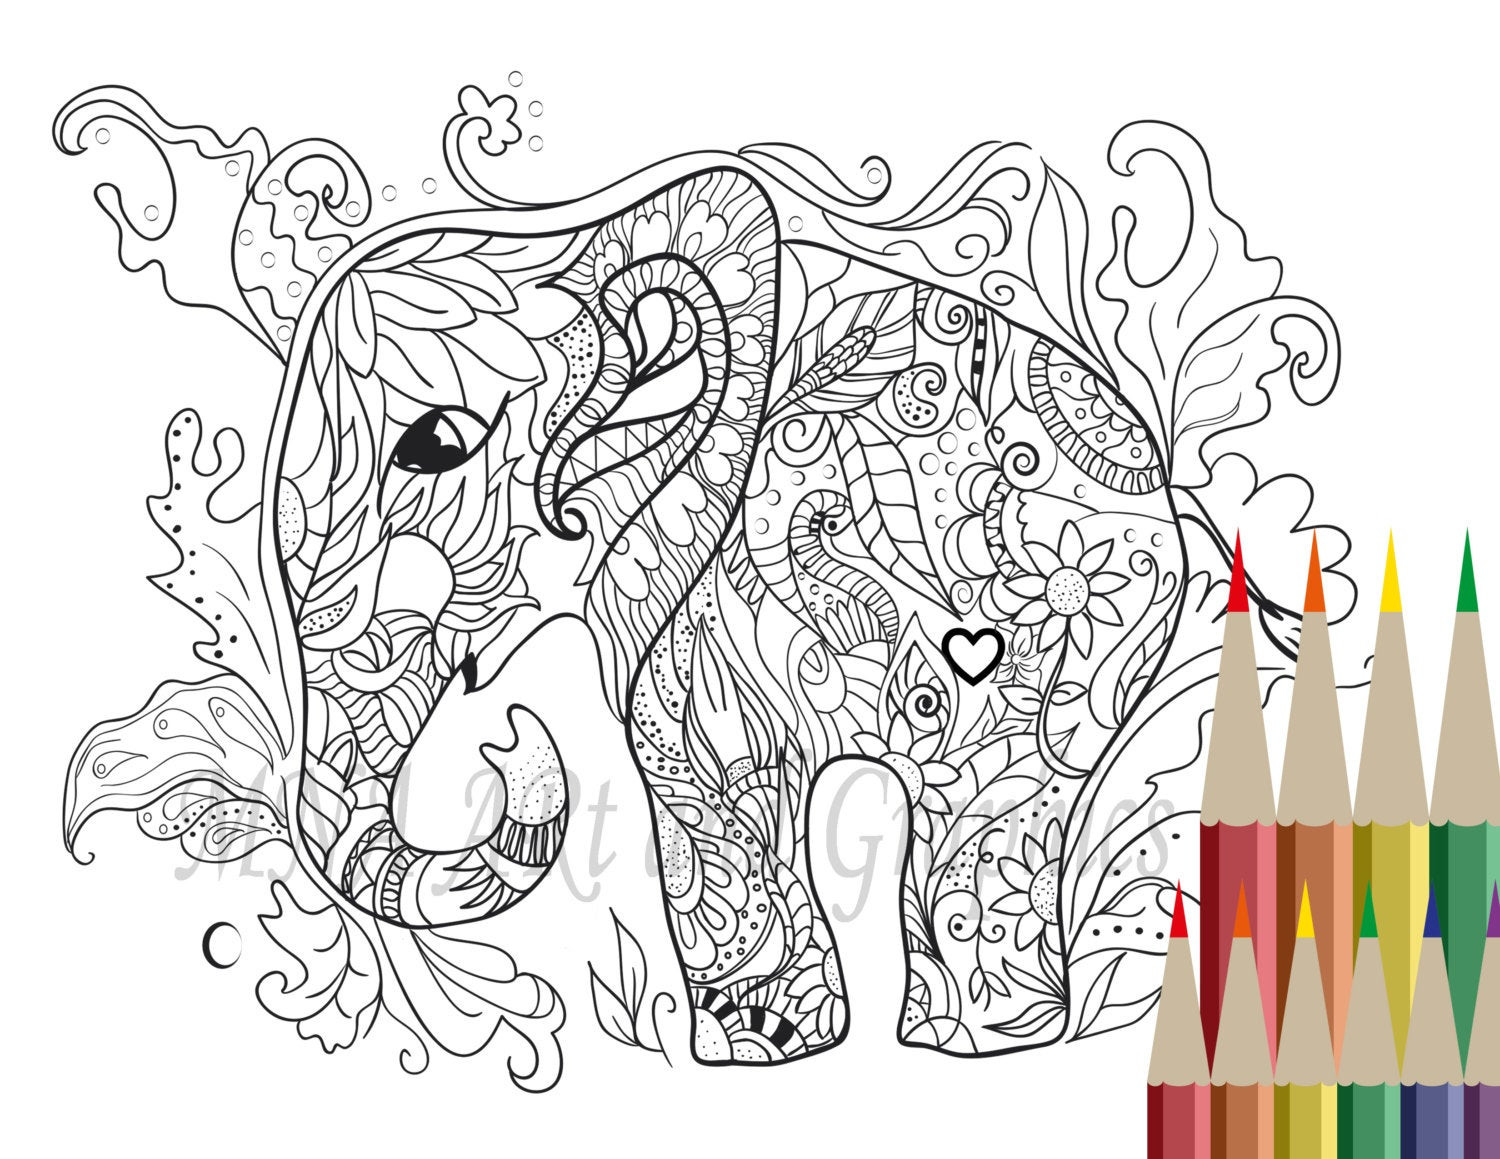 Elephant Adult Coloring Pages
 Elephant Coloring Page Adult Coloring Page by